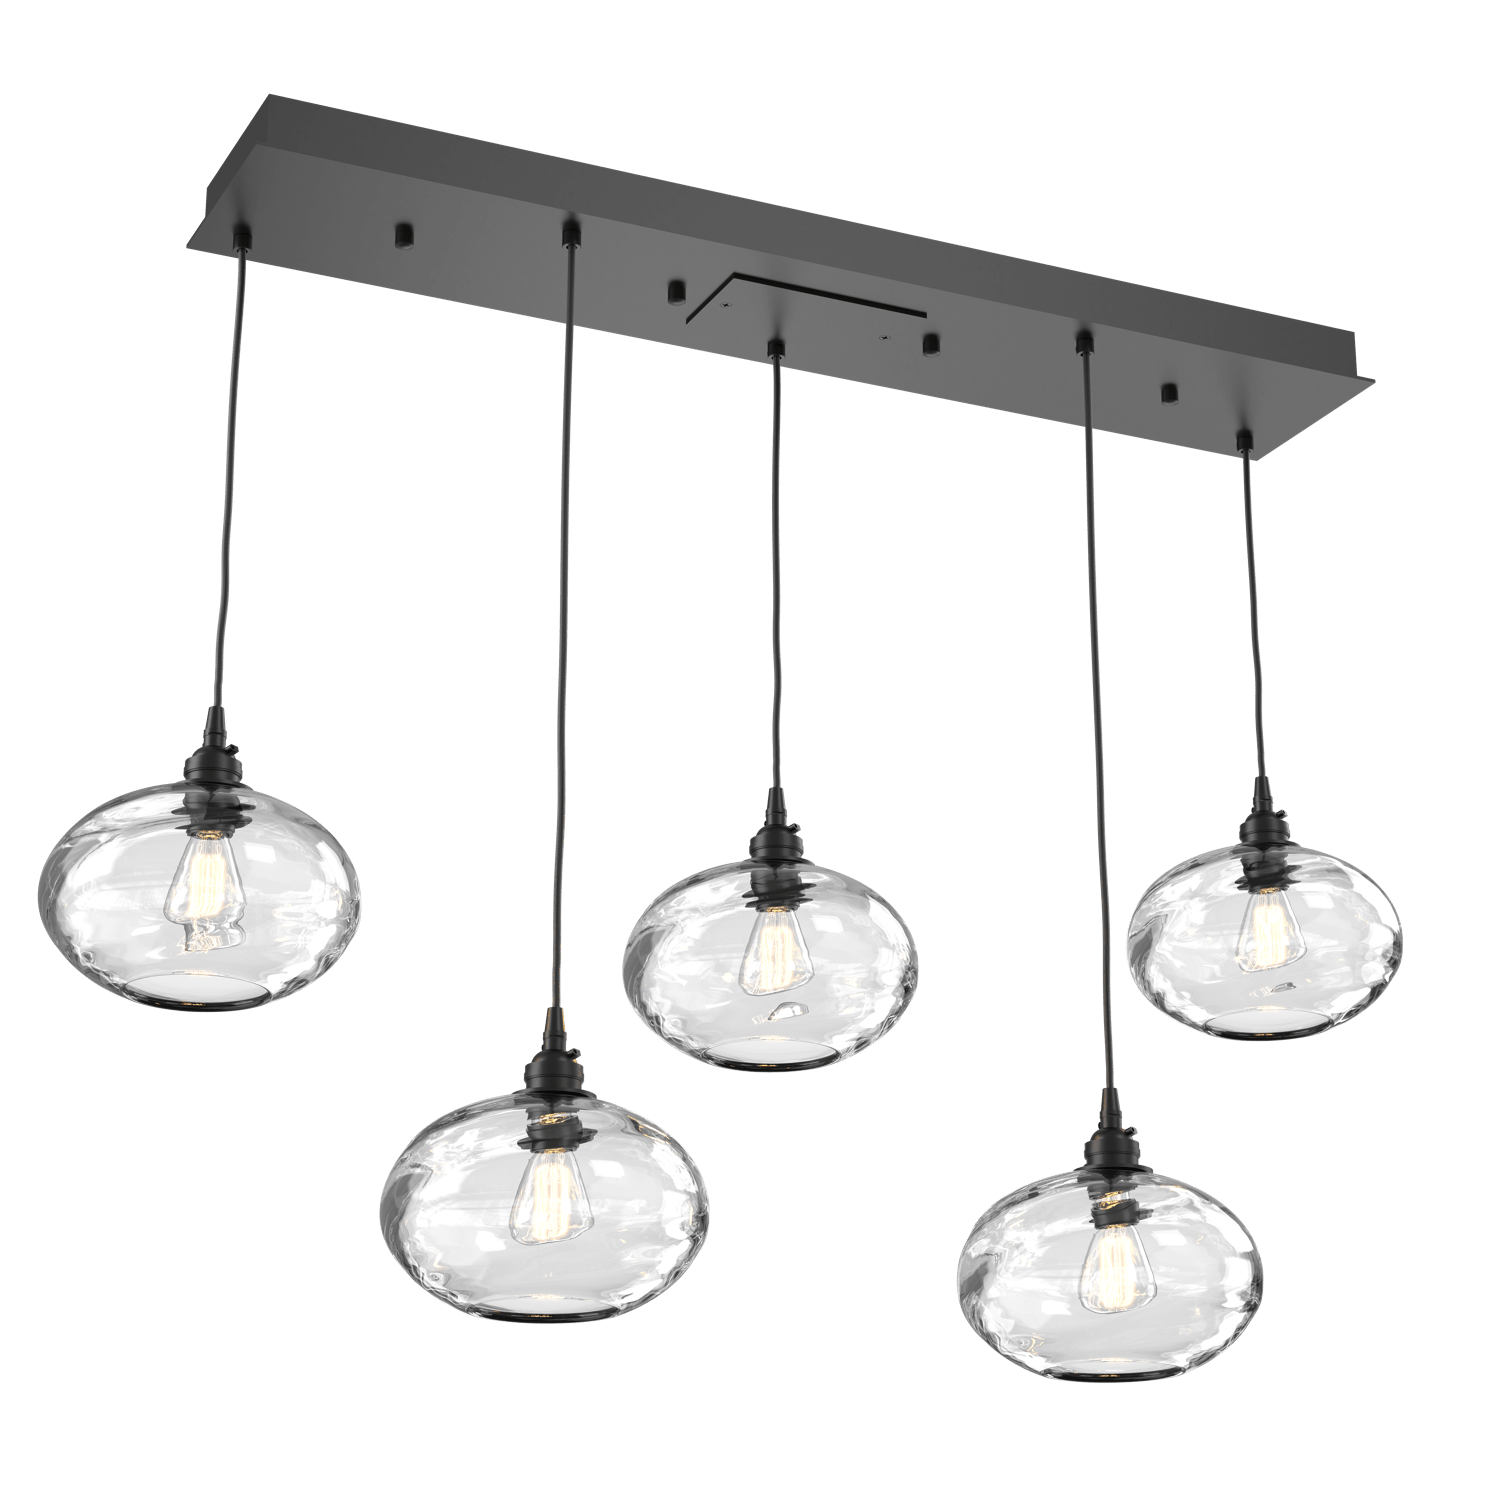 PLB0036-05-MB-OC-Hammerton-Studio-Optic-Blown-Glass-Coppa-5-light-linear-pendant-chandelier-with-matte-black-finish-and-optic-clear-blown-glass-shades-and-incandescent-lamping